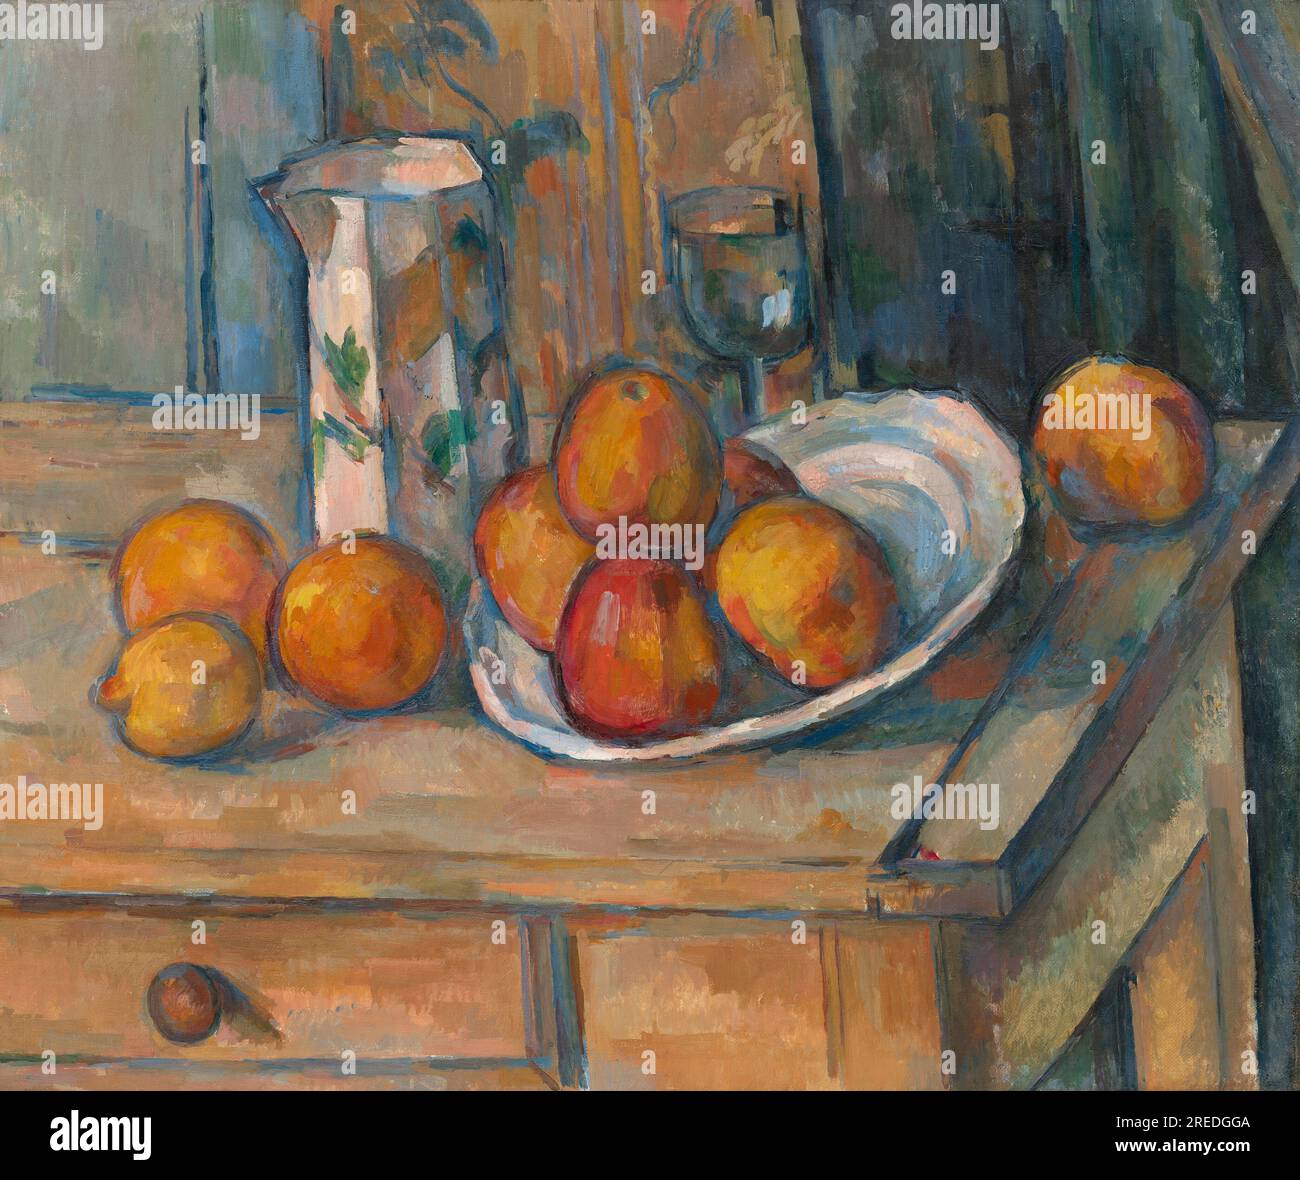 Title: Still Life with Milk Jug and Fruit Creator: Paul Cézanne Date: c. 1900 Dimensions: 45.8 x 54.9 cm  Medium: Oil on canvas Location: National Gallery of Art, Washington, D.C. Stock Photo